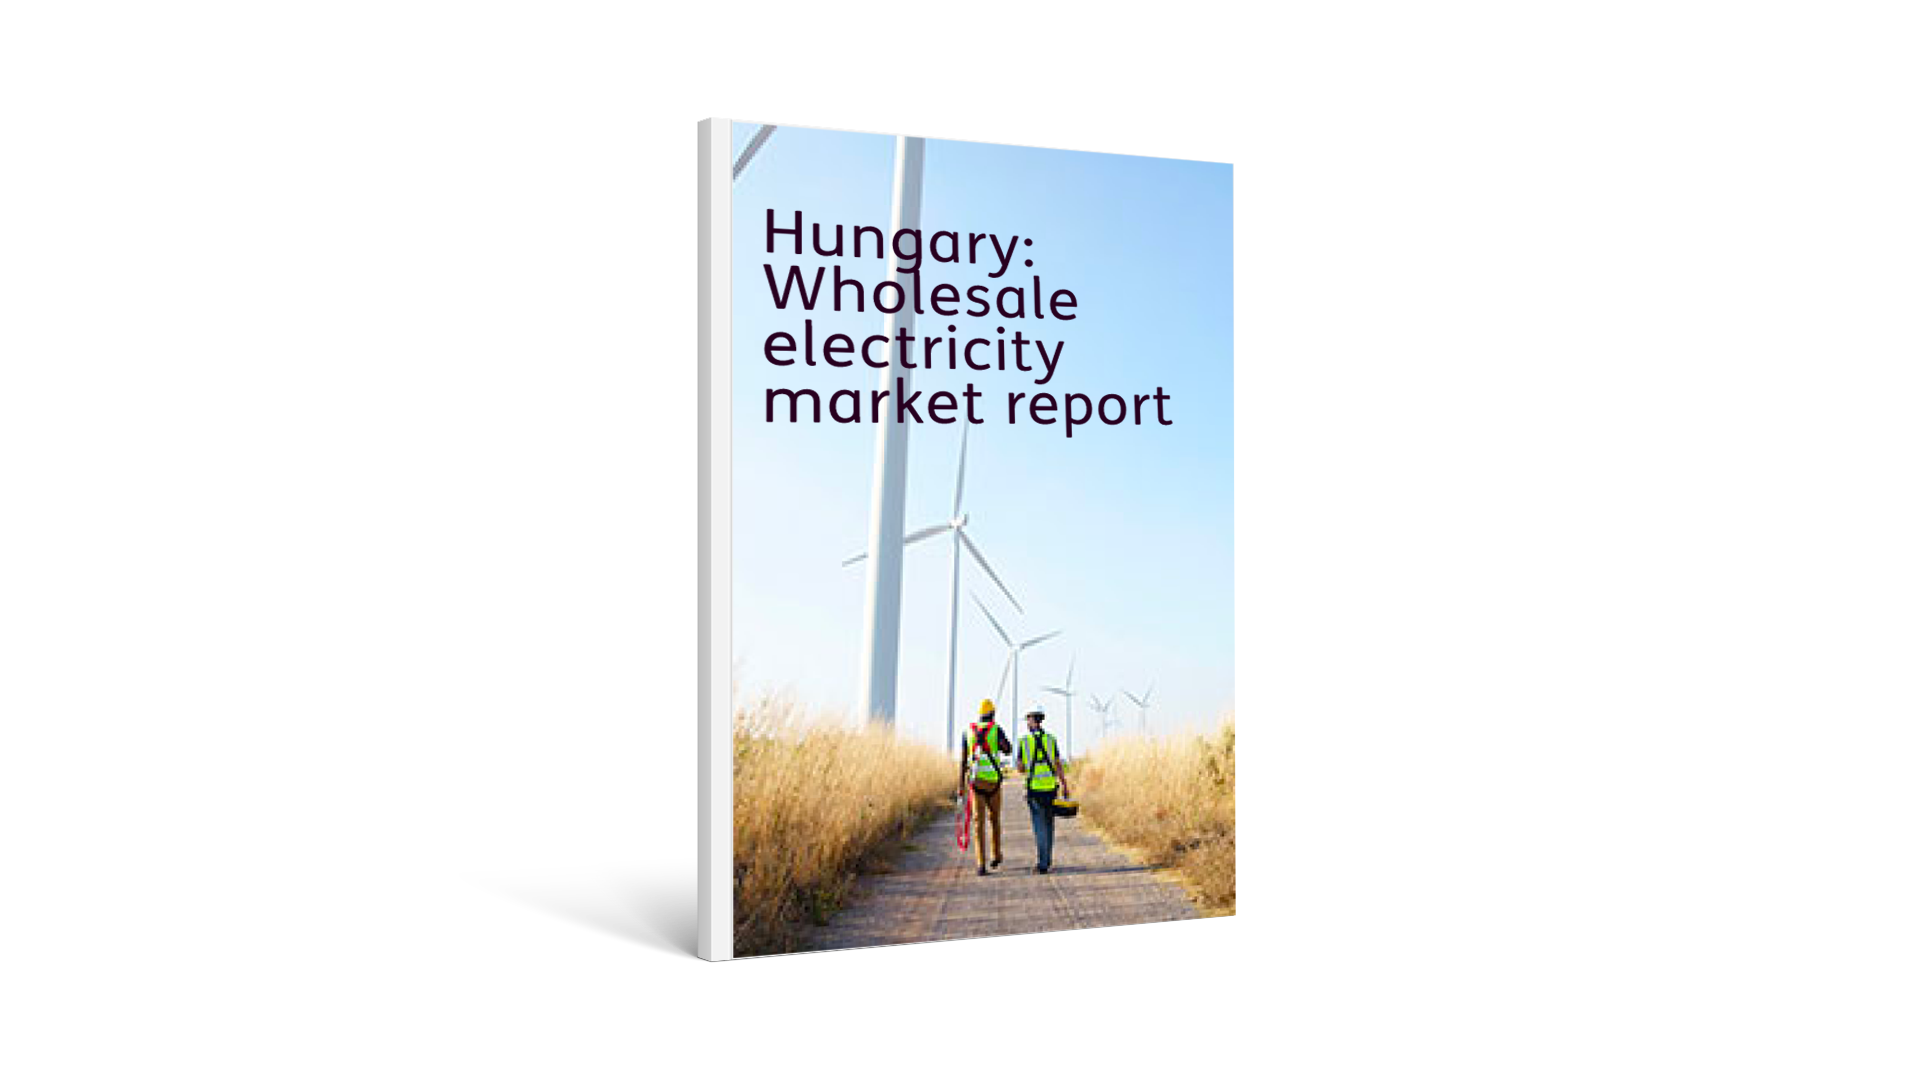 Hungary: Wholesale electricity market report